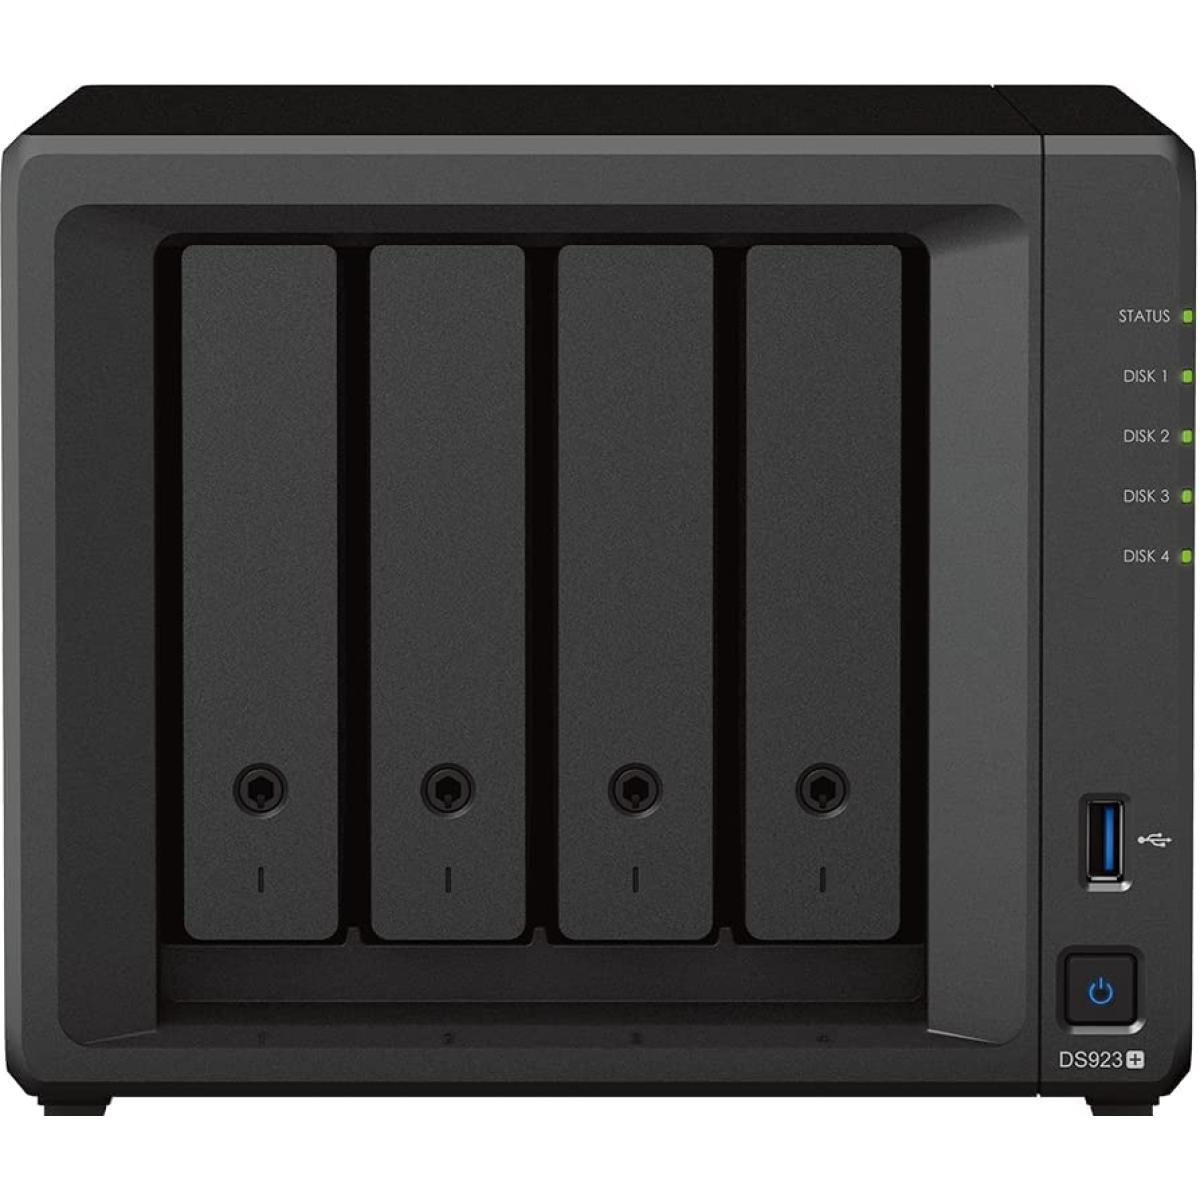 Synology DiskStation DS923+ 4-Bay NAS Flexible Enclosure Storage Platform For Small Businesses & Home Offices w/ AMD Ryzen R1600 CPU + 4GB DDR4 ECC SODIMM